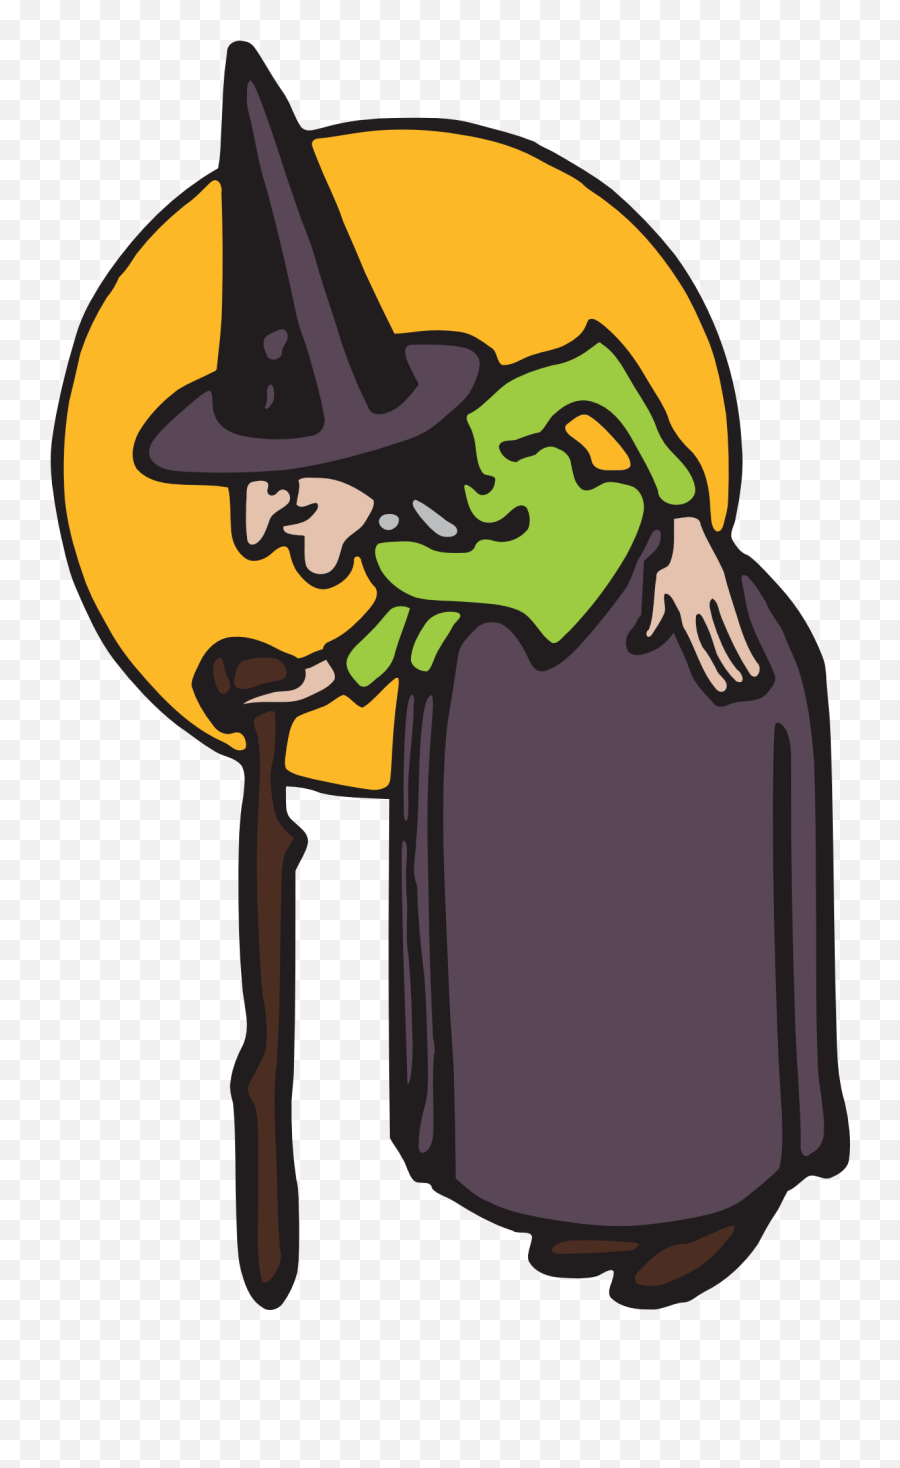 Clipart Of Old Witch Free Image Download Emoji,Old Clipart